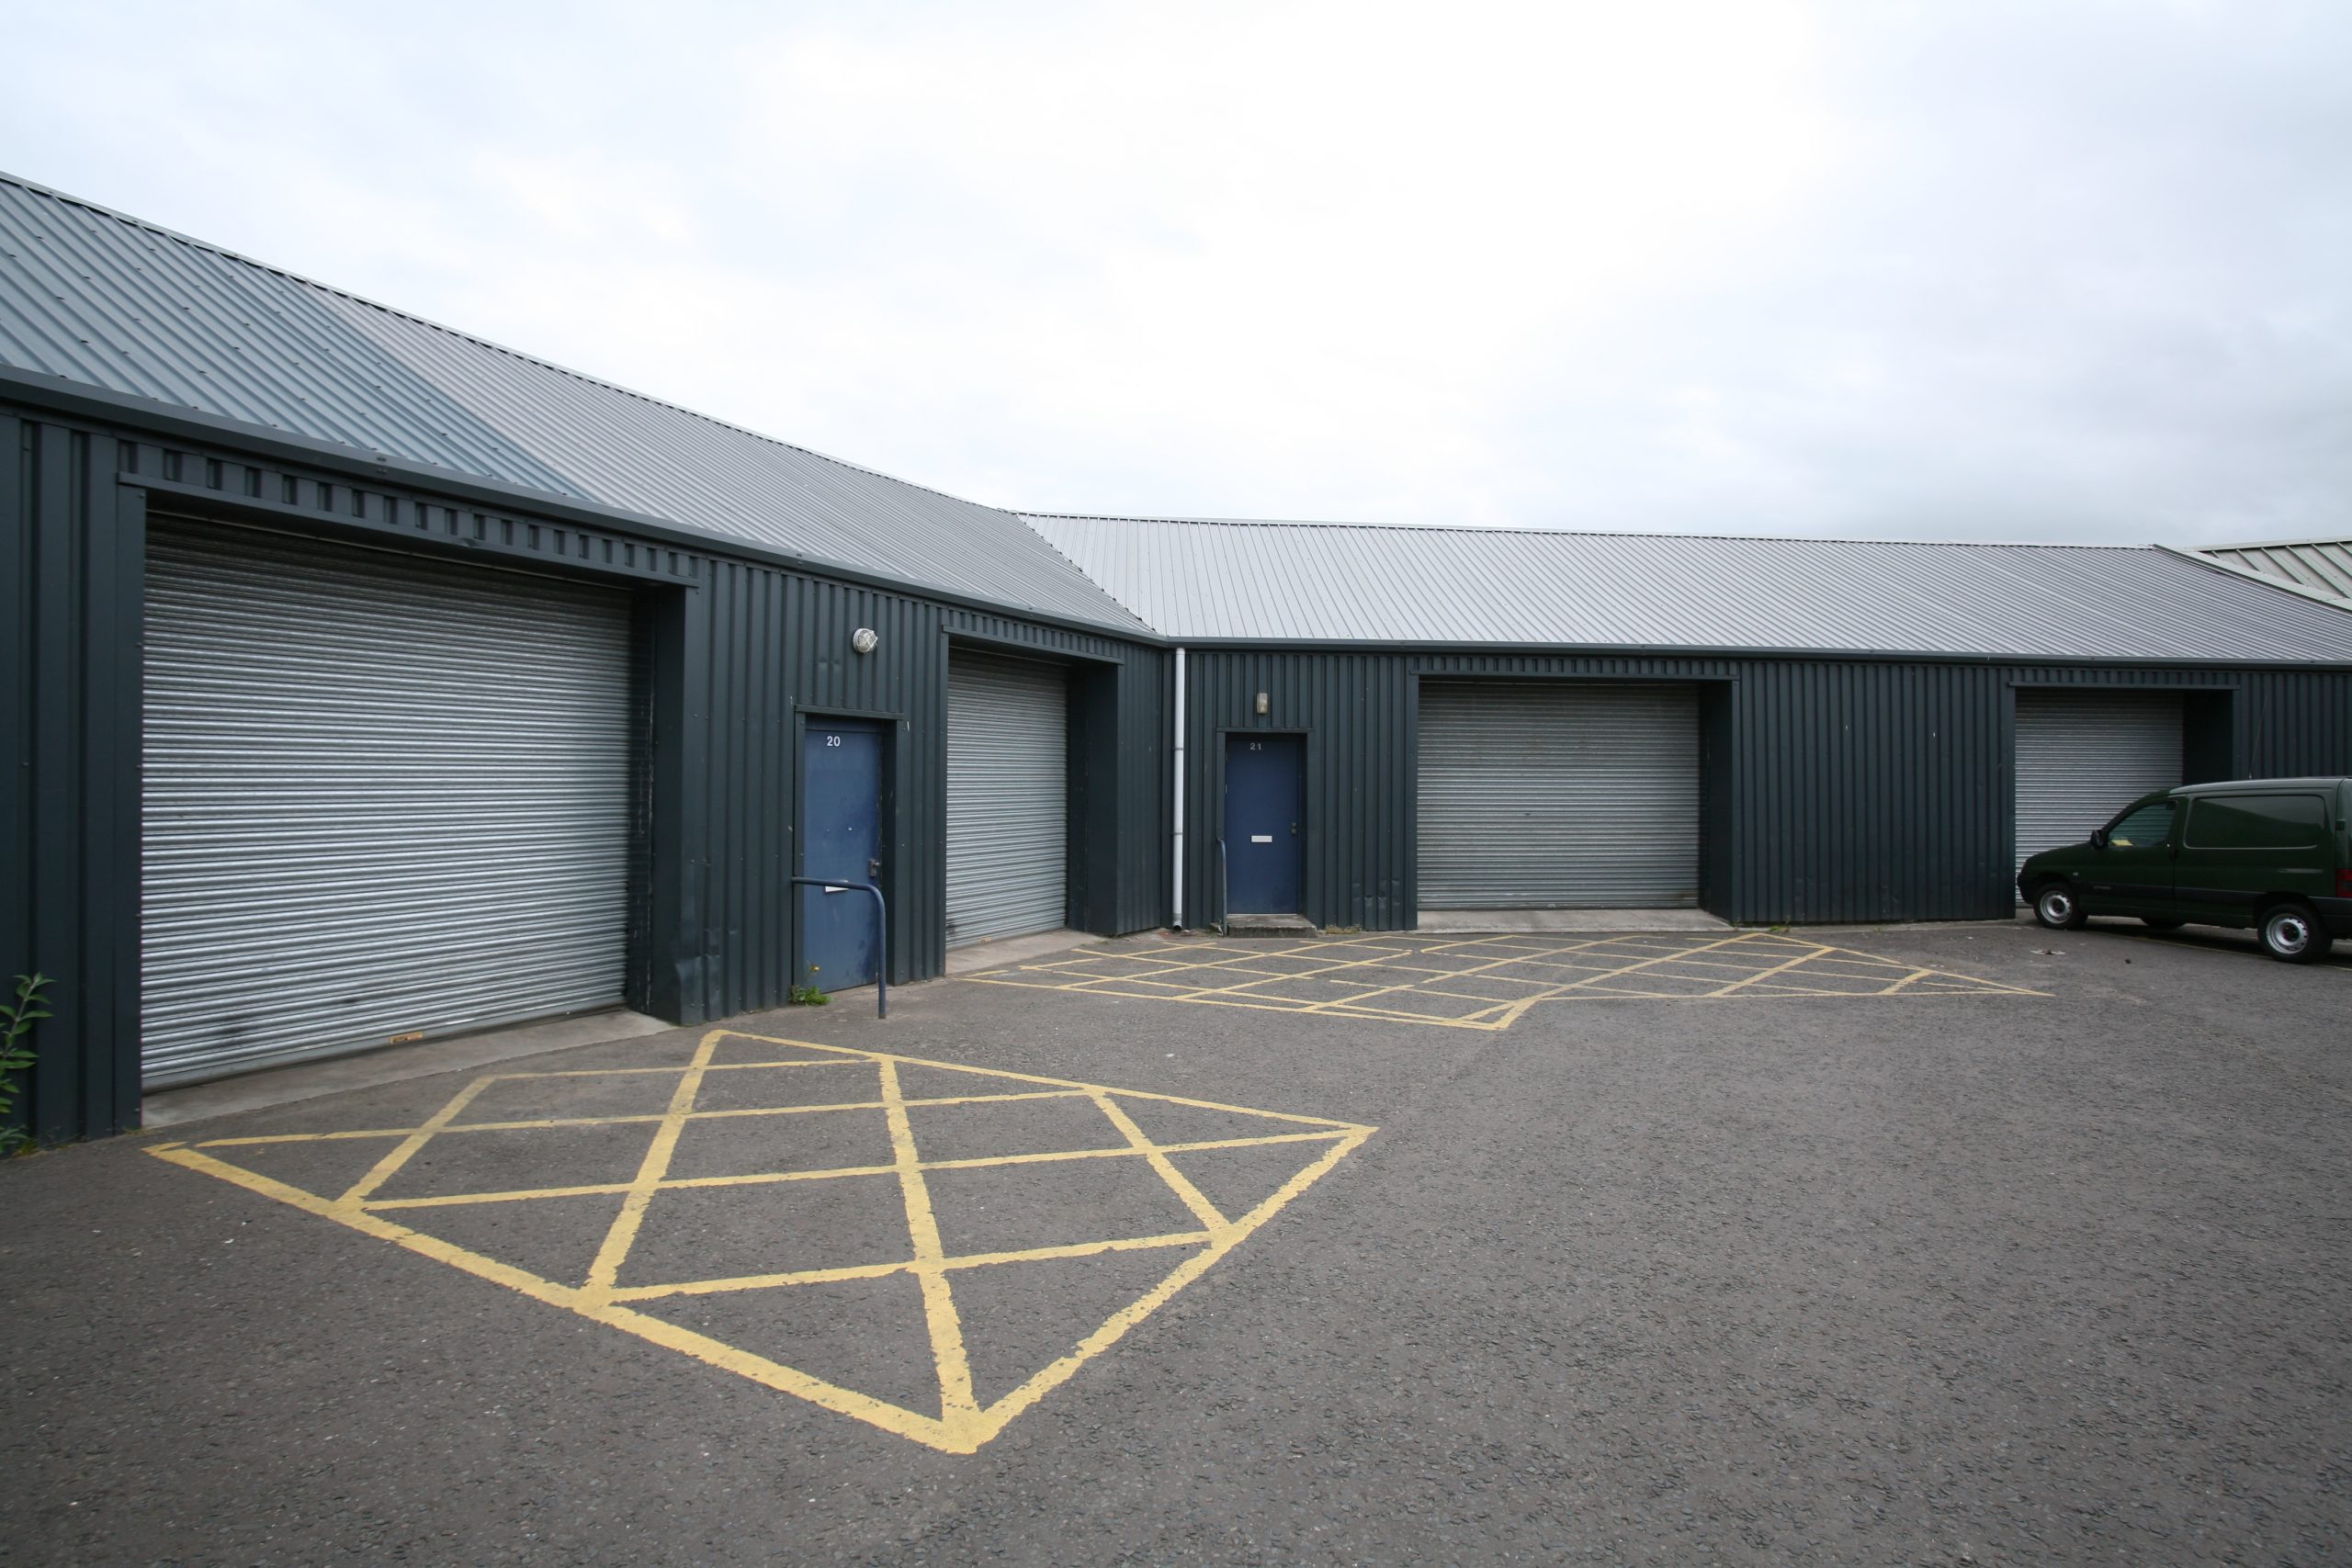 Castlecroft Commercial Property Industrial Units